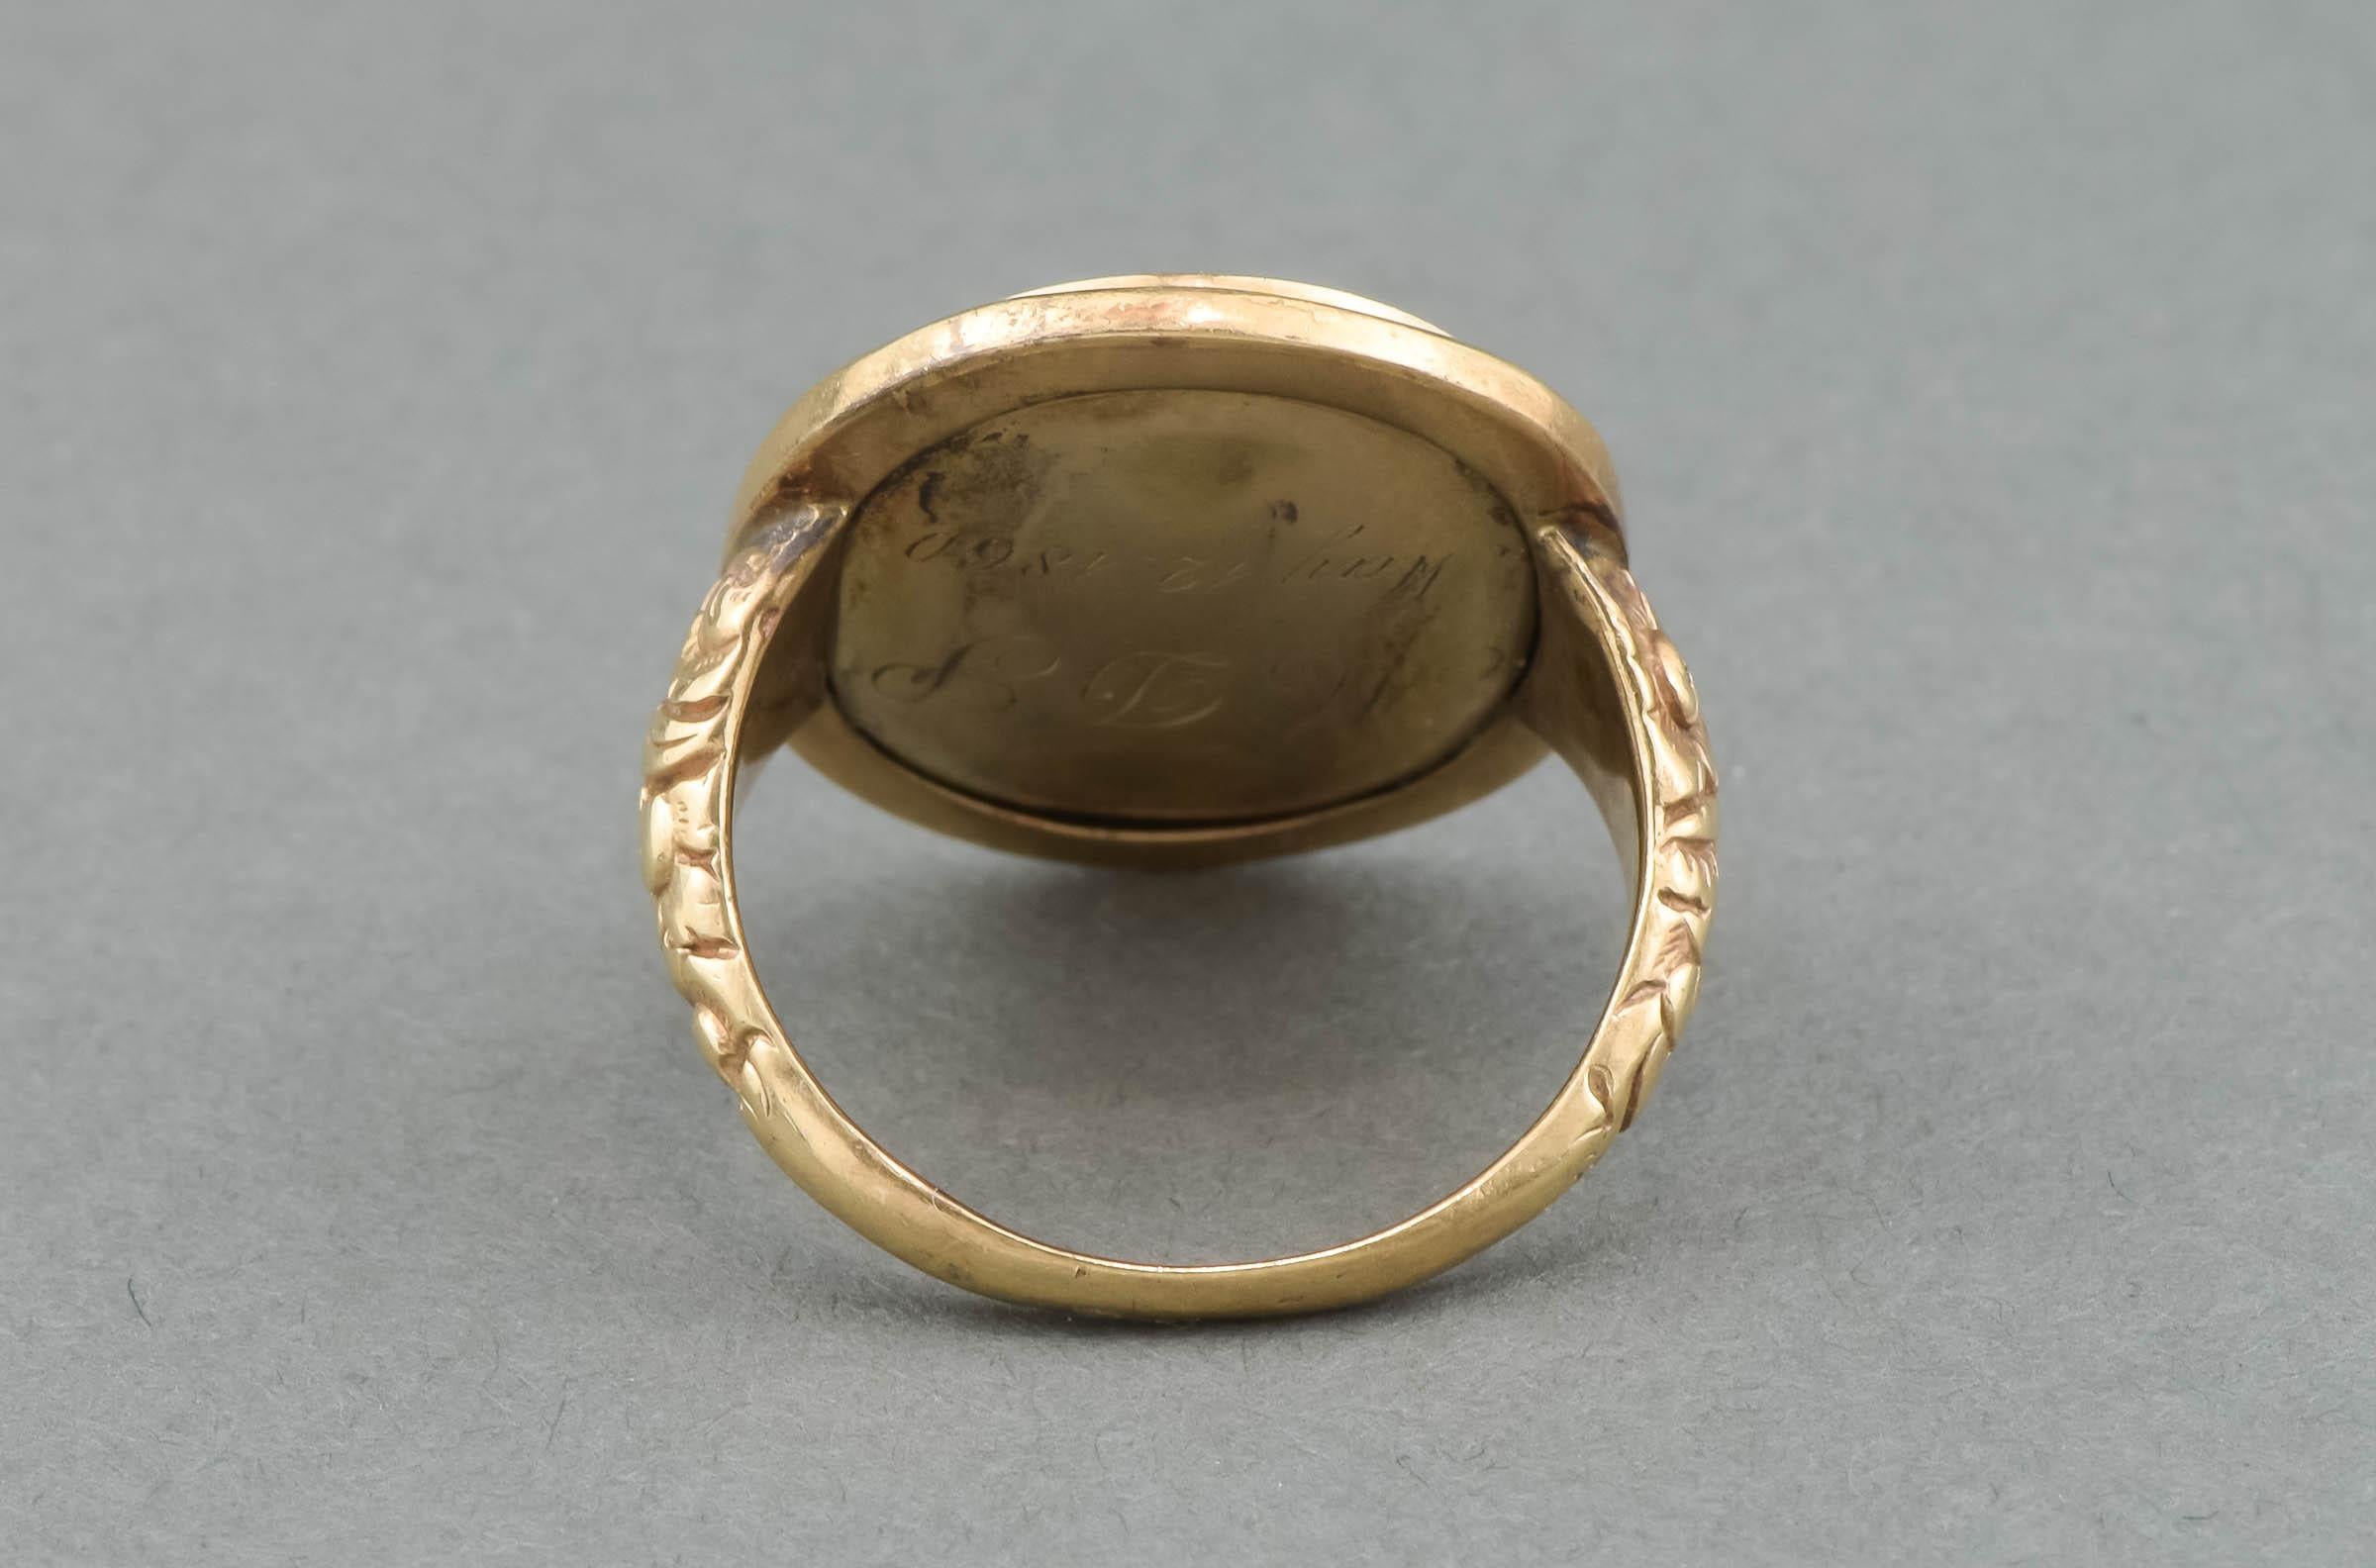 Antique Large Gold Locket Faced Ring with Hair Work, Engraved 1860 For Sale 2